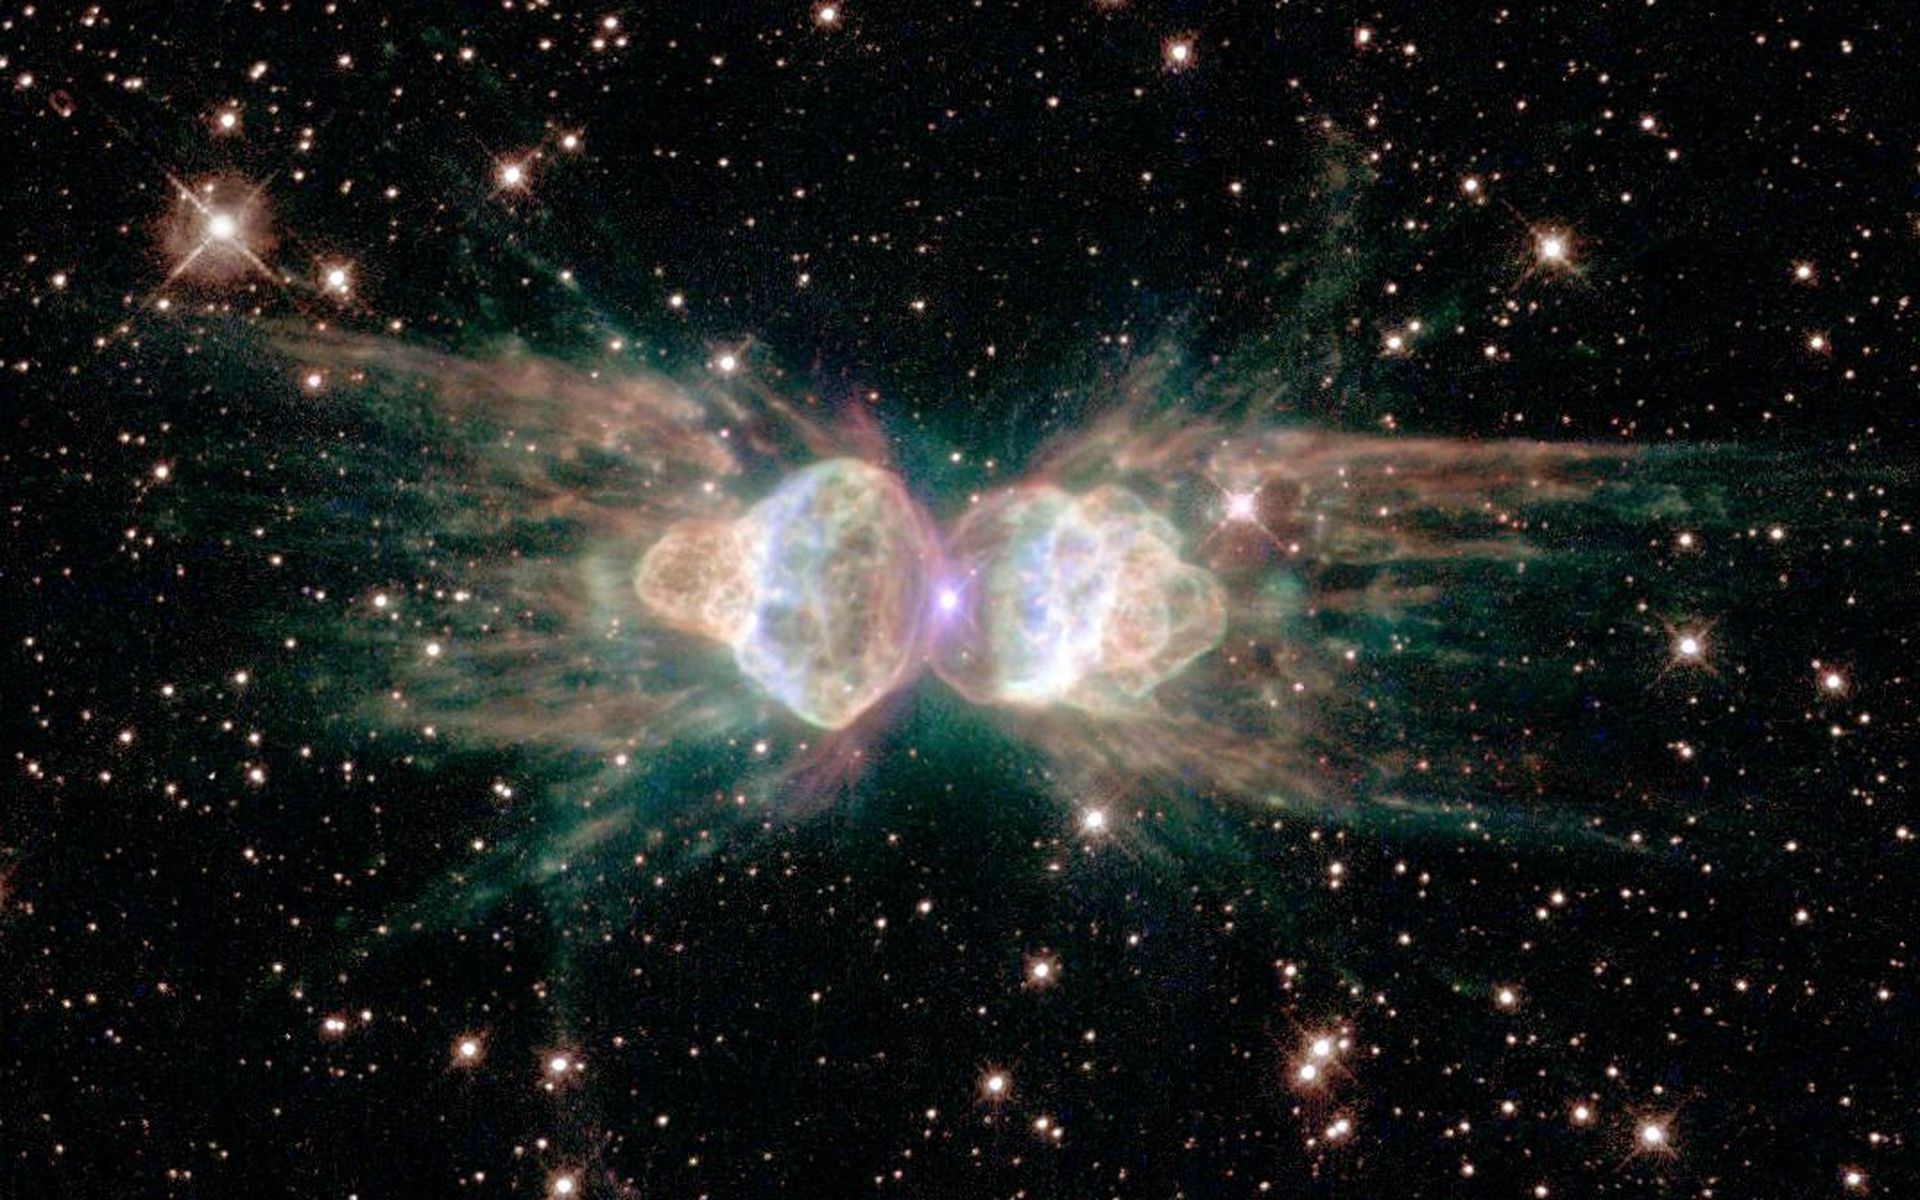 Researchers reveal binary star system in the ant-shaped Ant Nebula using lasers from the old nebula